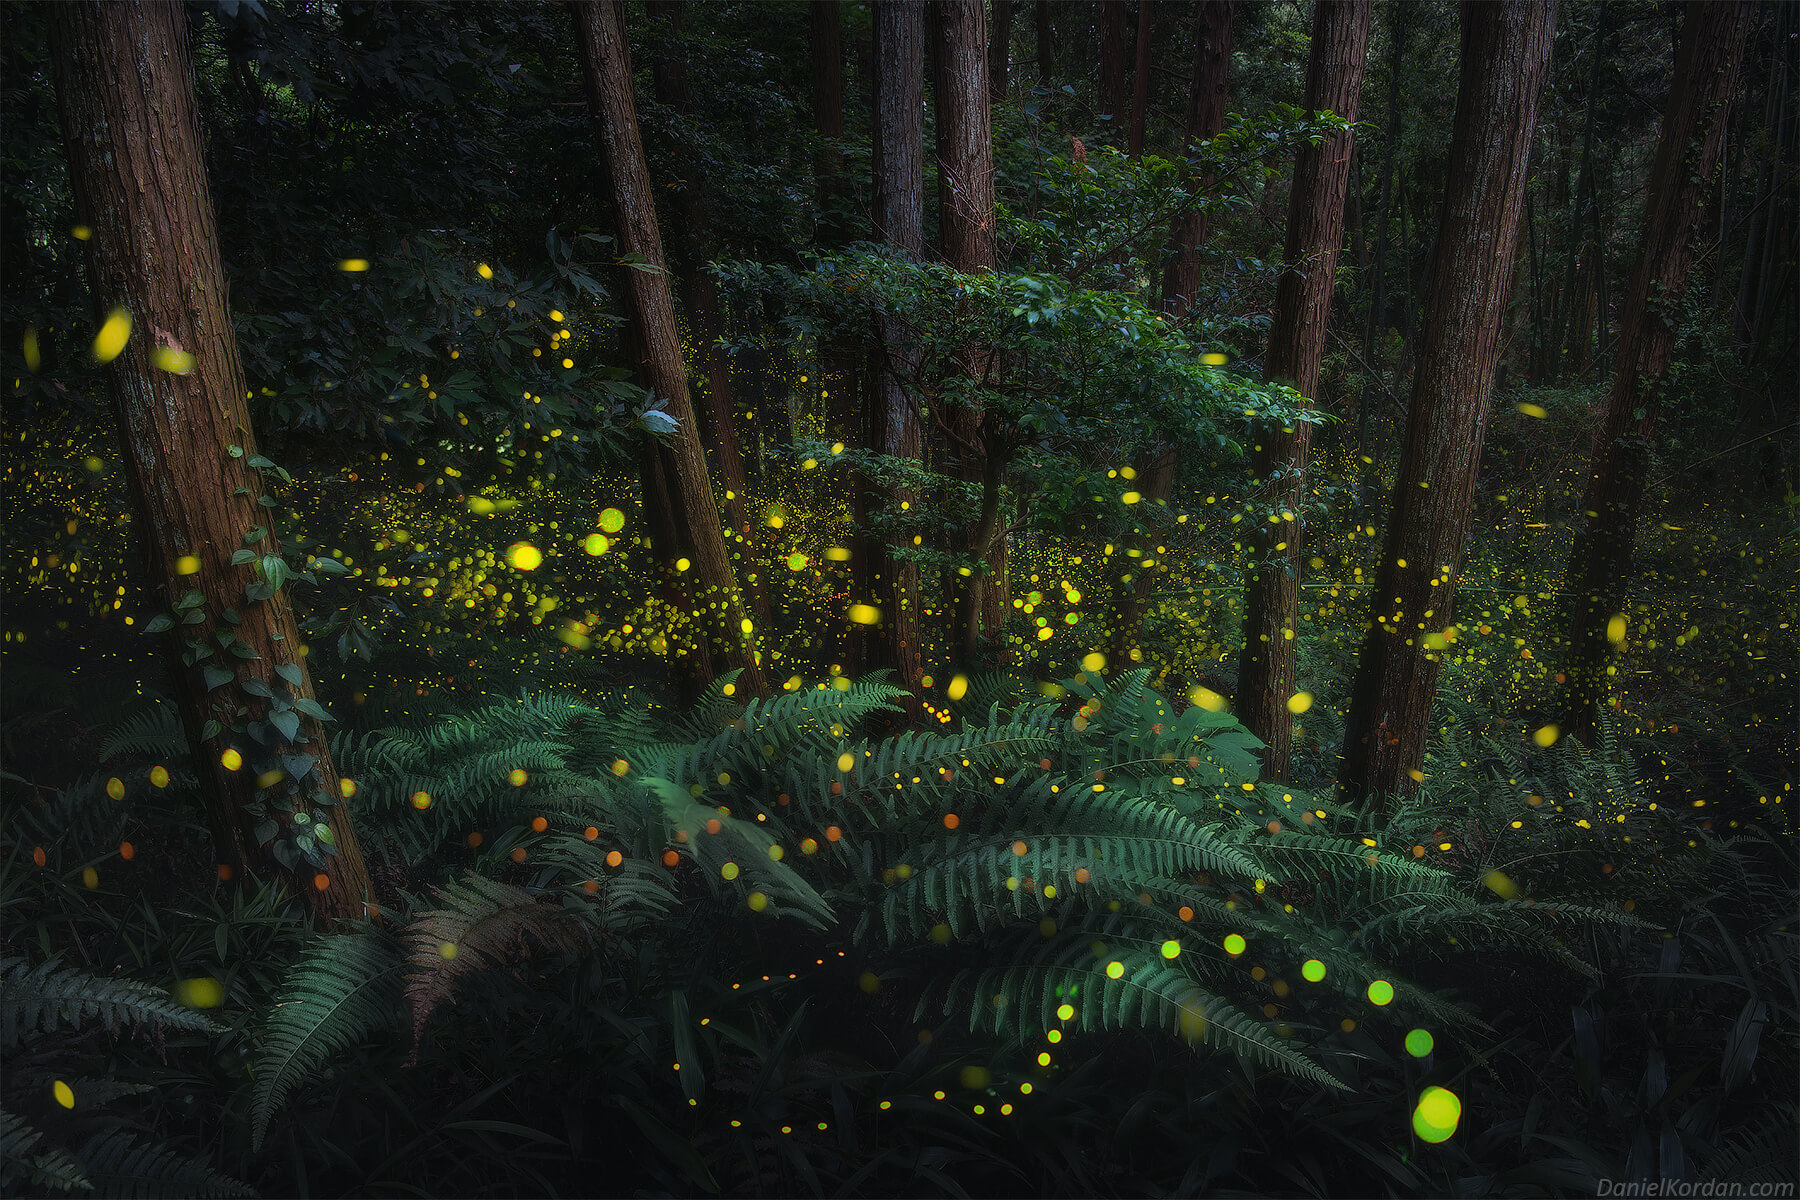 looking down at pictures of fireflies